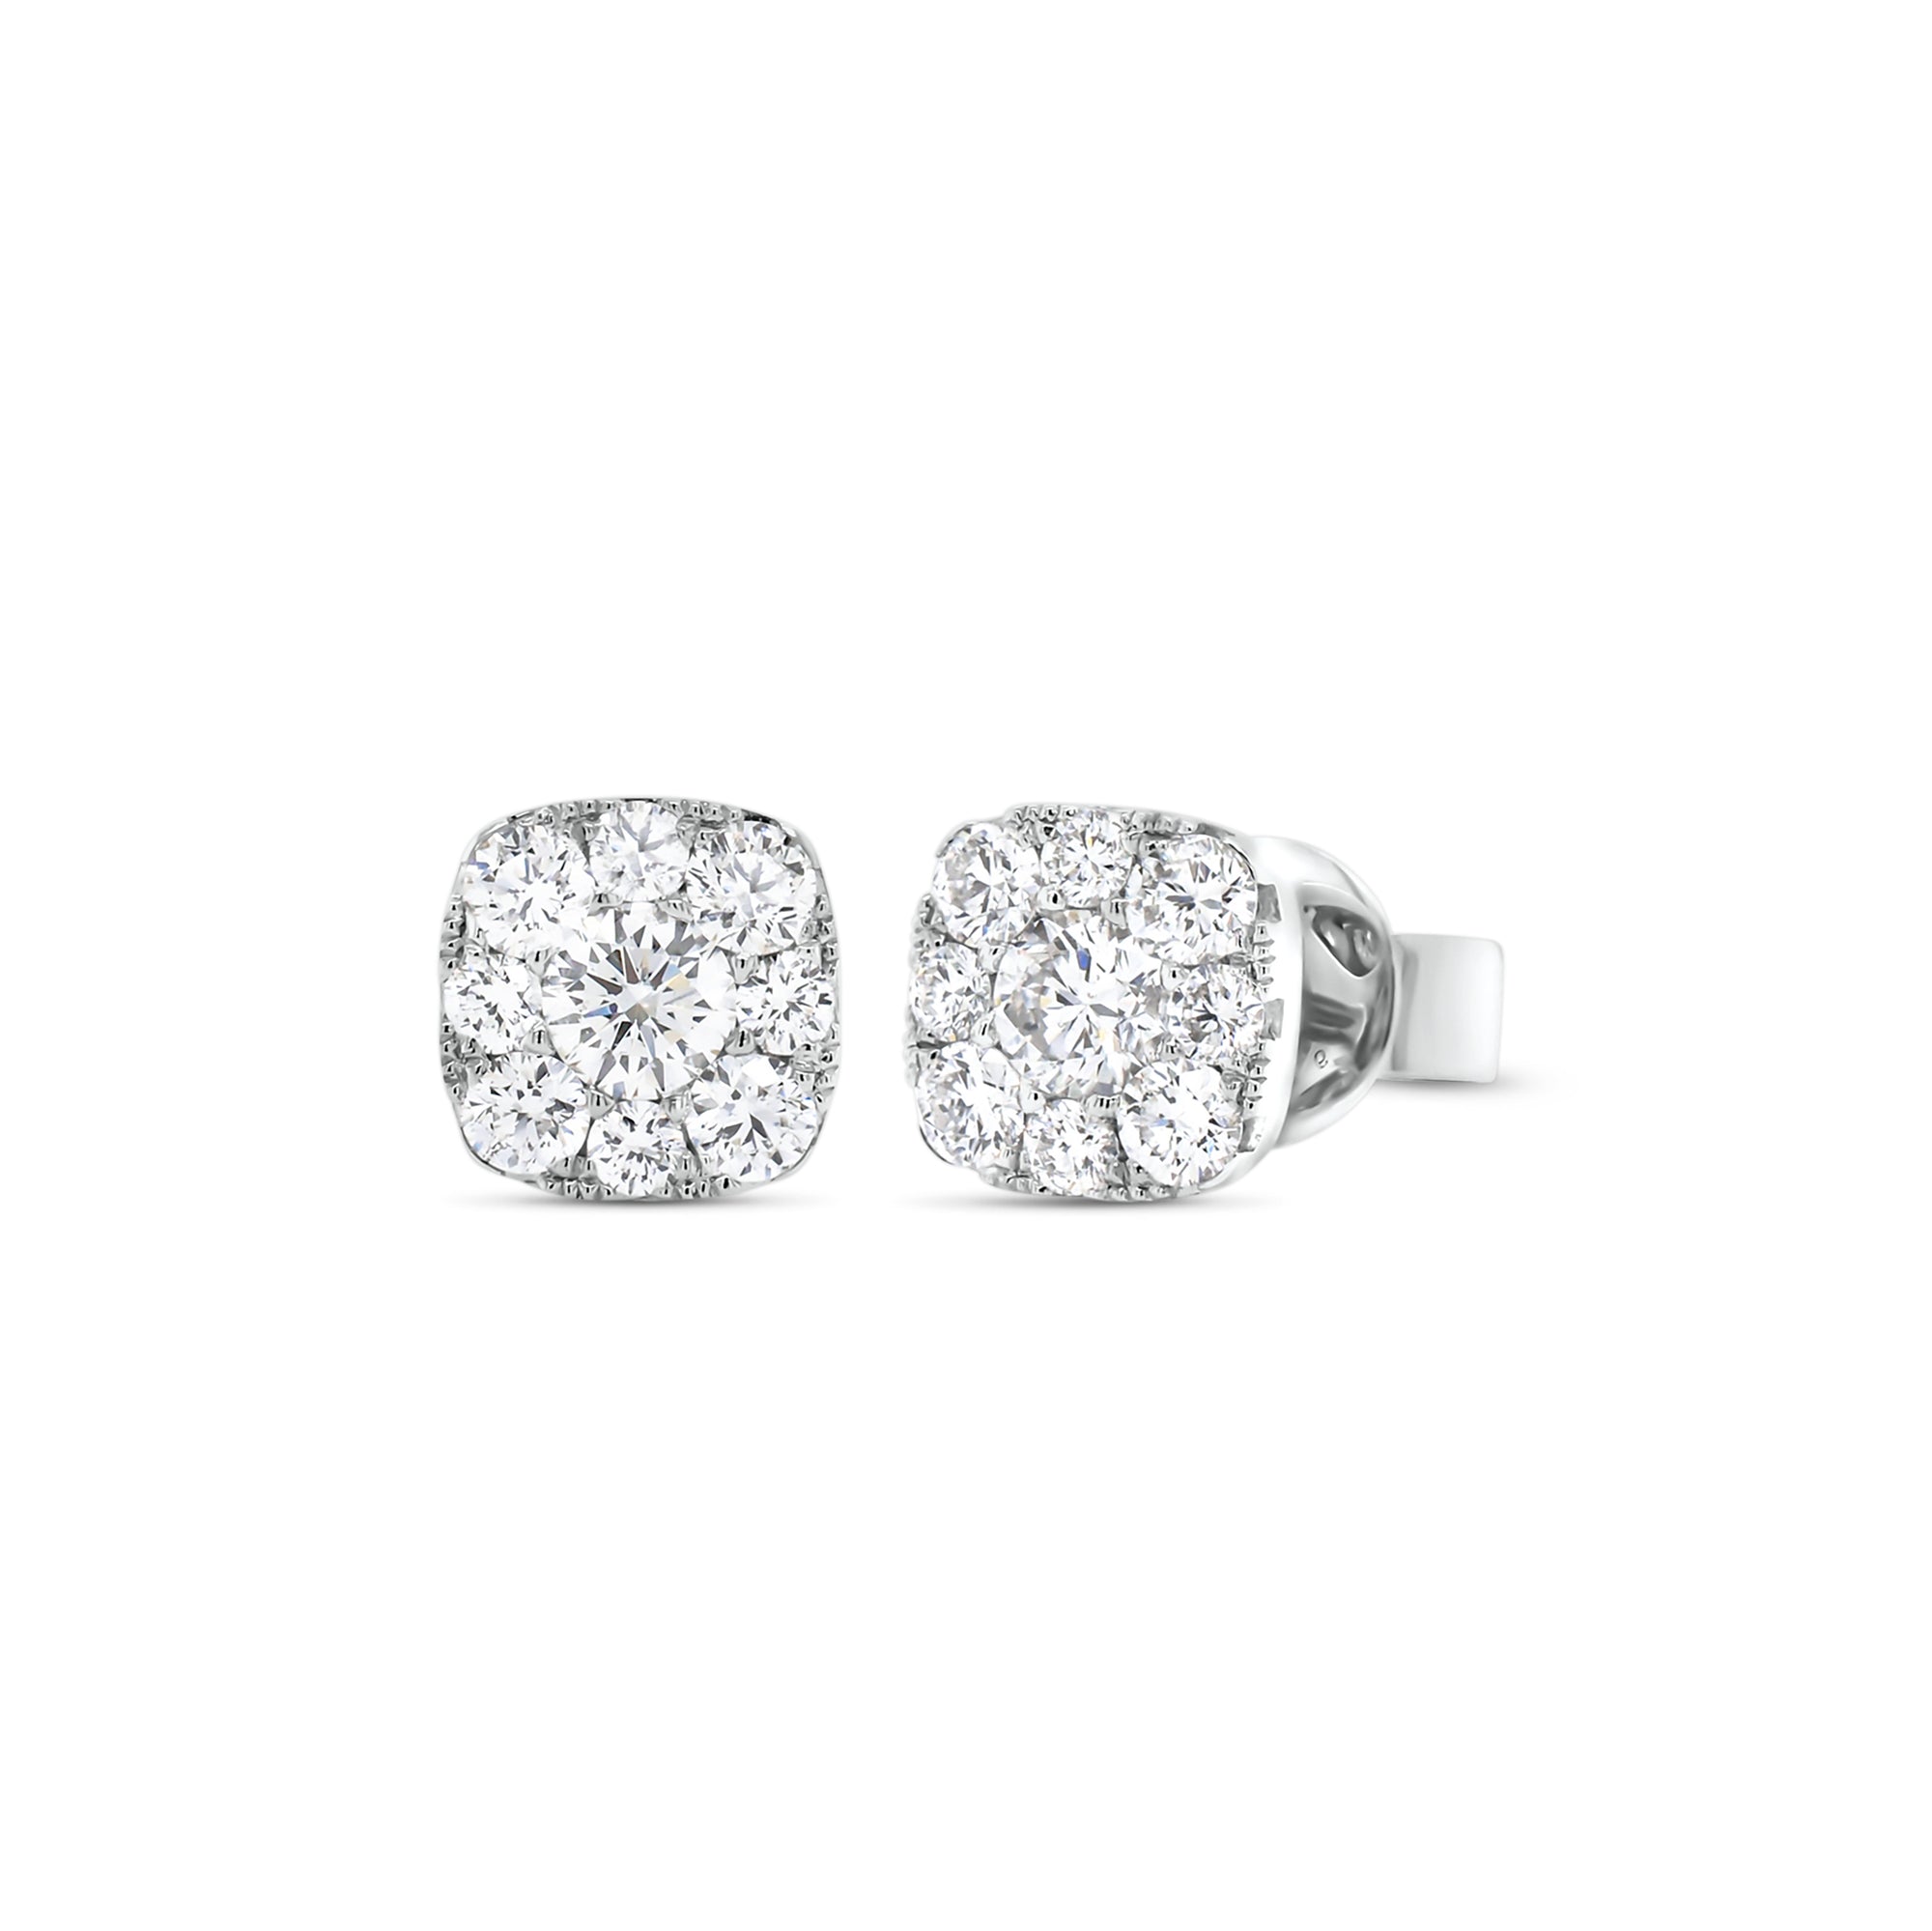 Diamond small cushion-shaped stud earrings - 18K gold weighing 2.15 grams  - 18 round diamonds totaling 0.71 carats